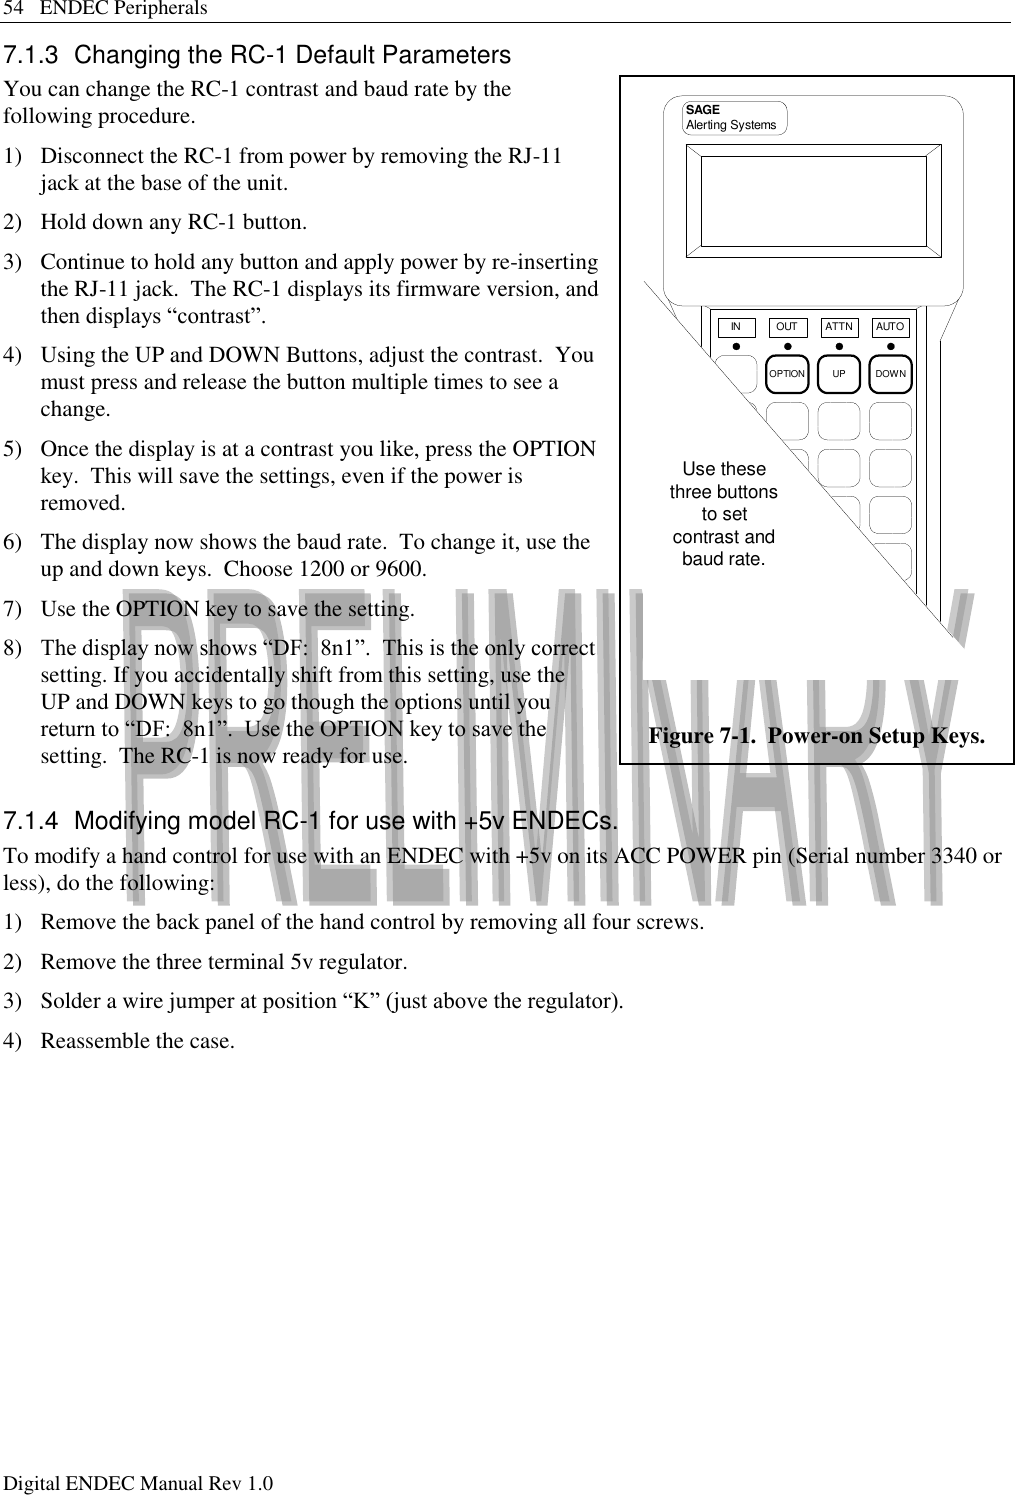 54   ENDEC Peripherals Digital ENDEC Manual Rev 1.0 7.1.3  Changing the RC-1 Default Parameters You can change the RC-1 contrast and baud rate by the following procedure. 1)  Disconnect the RC-1 from power by removing the RJ-11 jack at the base of the unit. 2)  Hold down any RC-1 button. 3)  Continue to hold any button and apply power by re-inserting the RJ-11 jack.  The RC-1 displays its firmware version, and then displays “contrast”. 4)  Using the UP and DOWN Buttons, adjust the contrast.  You must press and release the button multiple times to see a change. 5)  Once the display is at a contrast you like, press the OPTION key.  This will save the settings, even if the power is removed. 6)  The display now shows the baud rate.  To change it, use the up and down keys.  Choose 1200 or 9600. 7)  Use the OPTION key to save the setting. 8)  The display now shows “DF:  8n1”.  This is the only correct setting. If you accidentally shift from this setting, use the UP and DOWN keys to go though the options until you return to “DF:  8n1”.  Use the OPTION key to save the setting.  The RC-1 is now ready for use. 7.1.4  Modifying model RC-1 for use with +5v ENDECs. To modify a hand control for use with an ENDEC with +5v on its ACC POWER pin (Serial number 3340 or less), do the following: 1)  Remove the back panel of the hand control by removing all four screws. 2)  Remove the three terminal 5v regulator. 3)  Solder a wire jumper at position “K” (just above the regulator). 4)  Reassemble the case. OPTION UP DOWNIN OUT ATTN AUTOSAGEAlerting SystemsUse thesethree buttonsto setcontrast andbaud rate. Figure 7-1.  Power-on Setup Keys. 